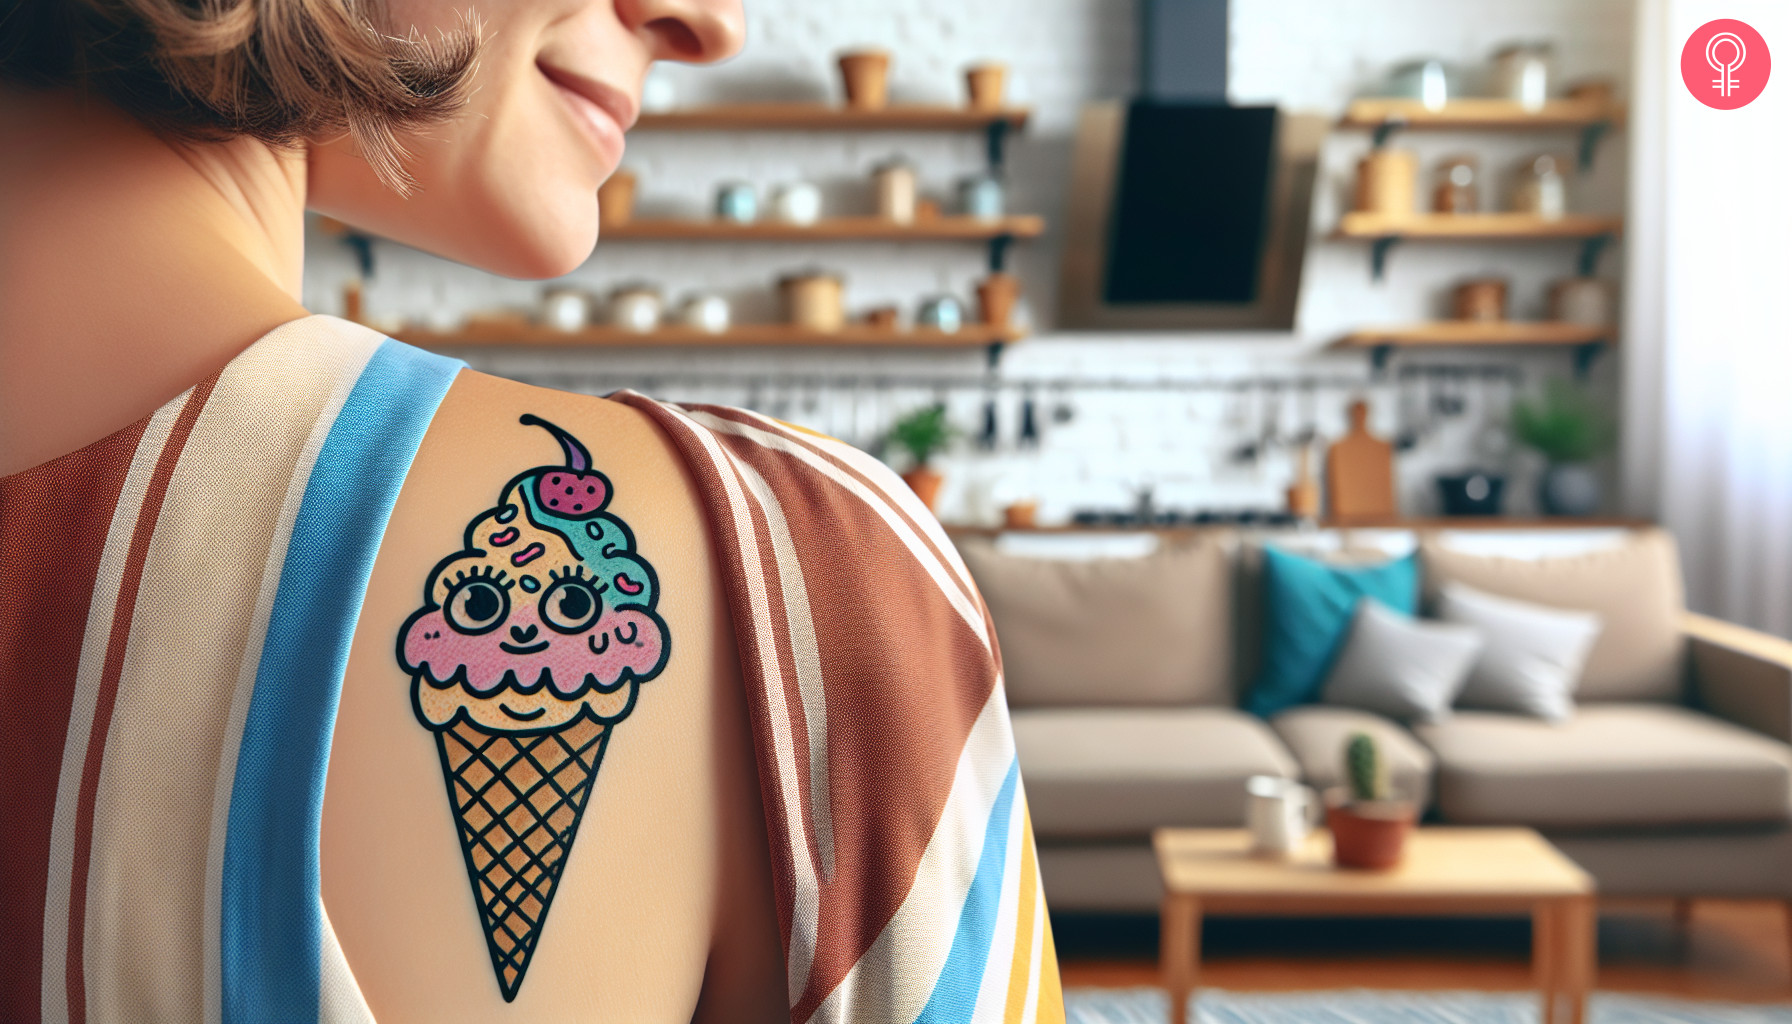 A woman flaunting a cartoon ice cream tattoo on her shoulder